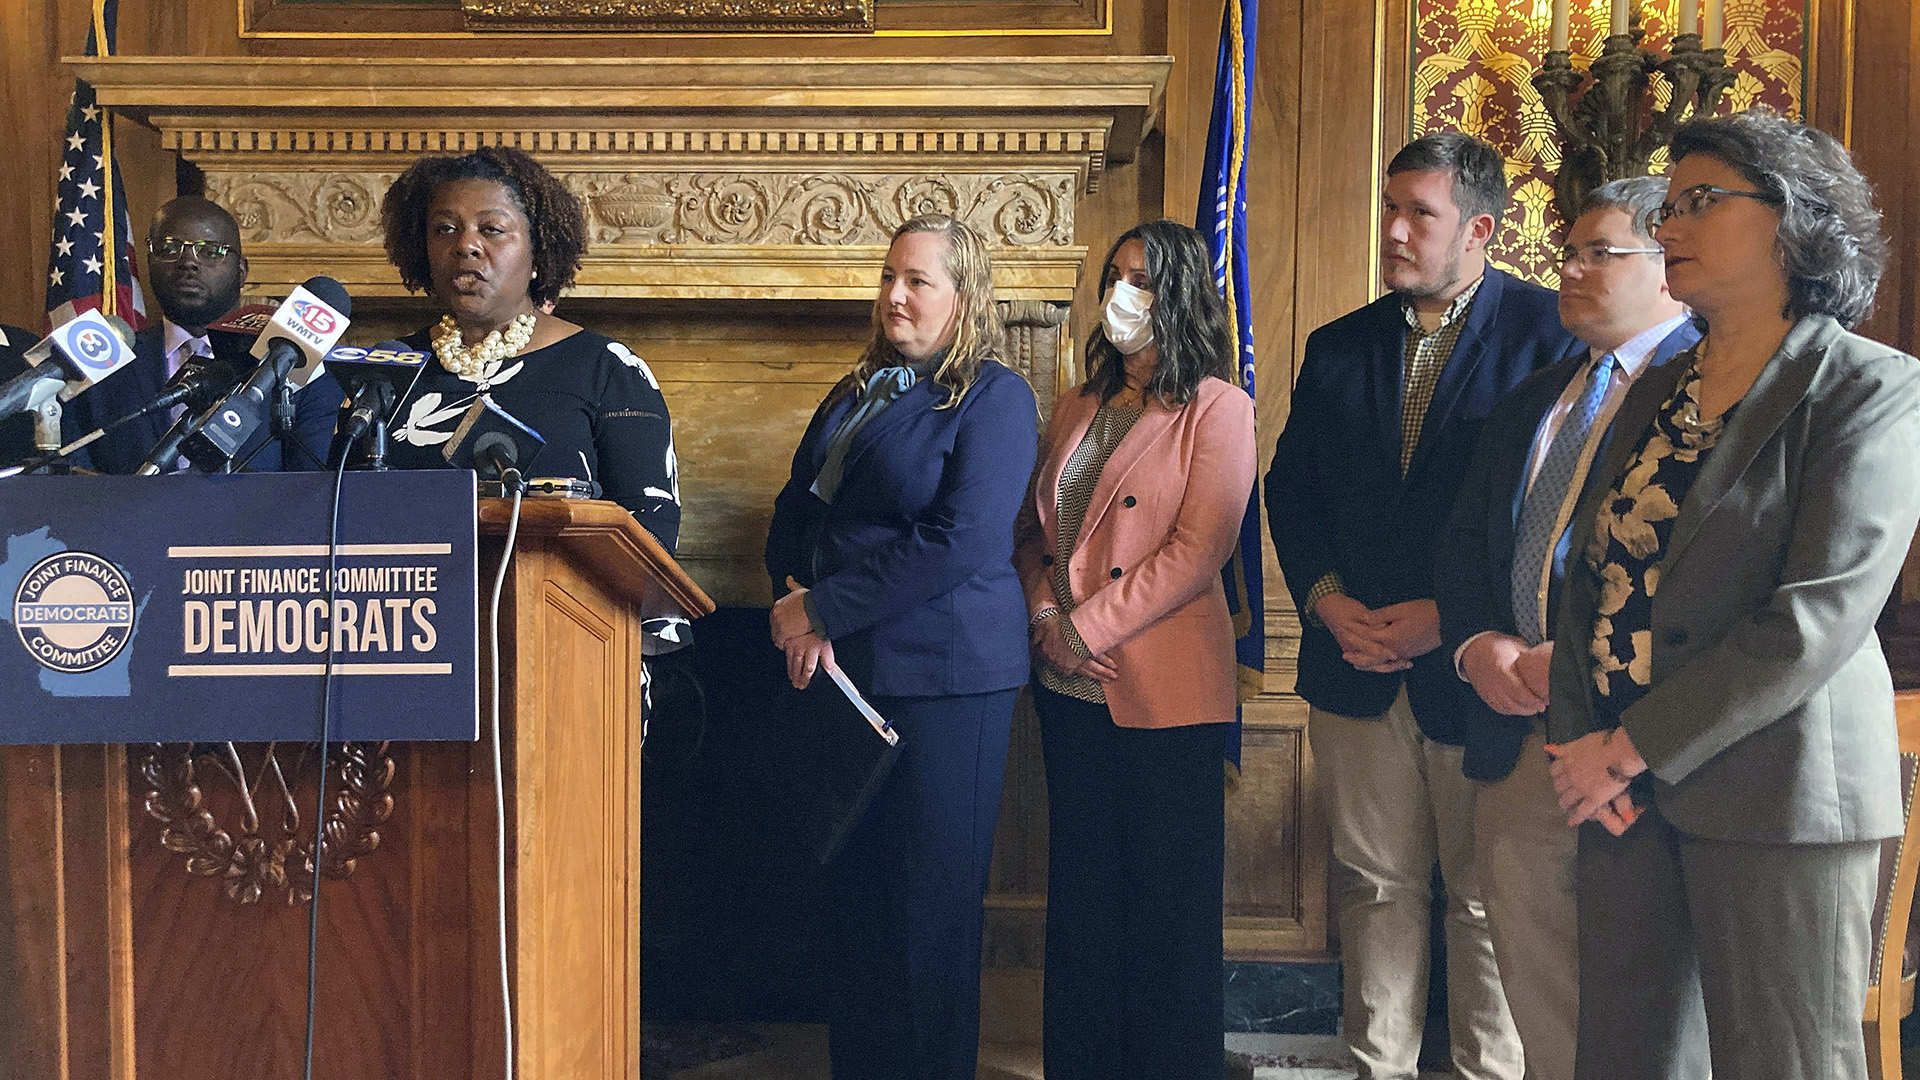 LaTonya Johnson stands at a podium with a sign with the words "Joint Finance Committee Democrats" and speaks into multiple microphones, with other people standing behind her in a room with gilt toile wallpaper, a carved wood mantel for a fireplace, and the U.S. and Wisconsin flags.